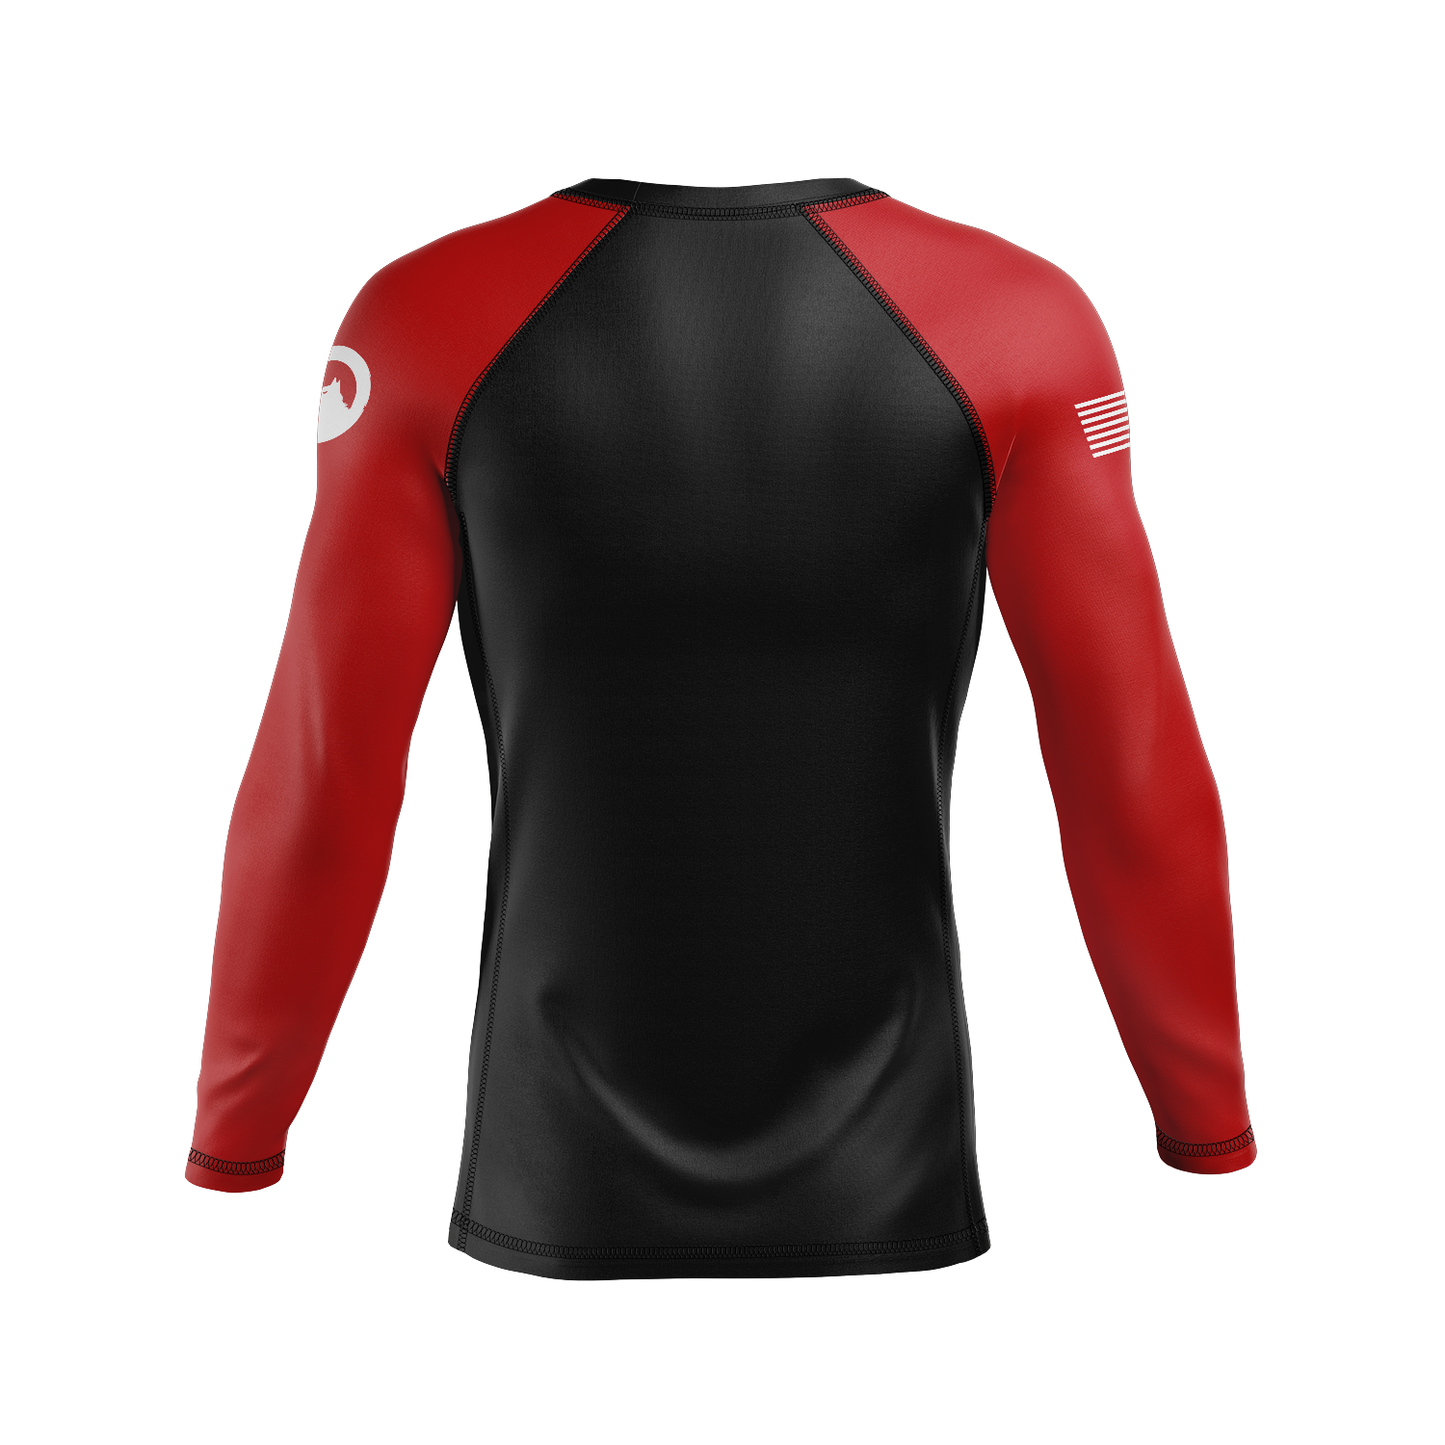 Flow BJJ women's rash guard Standard Issue, black and red